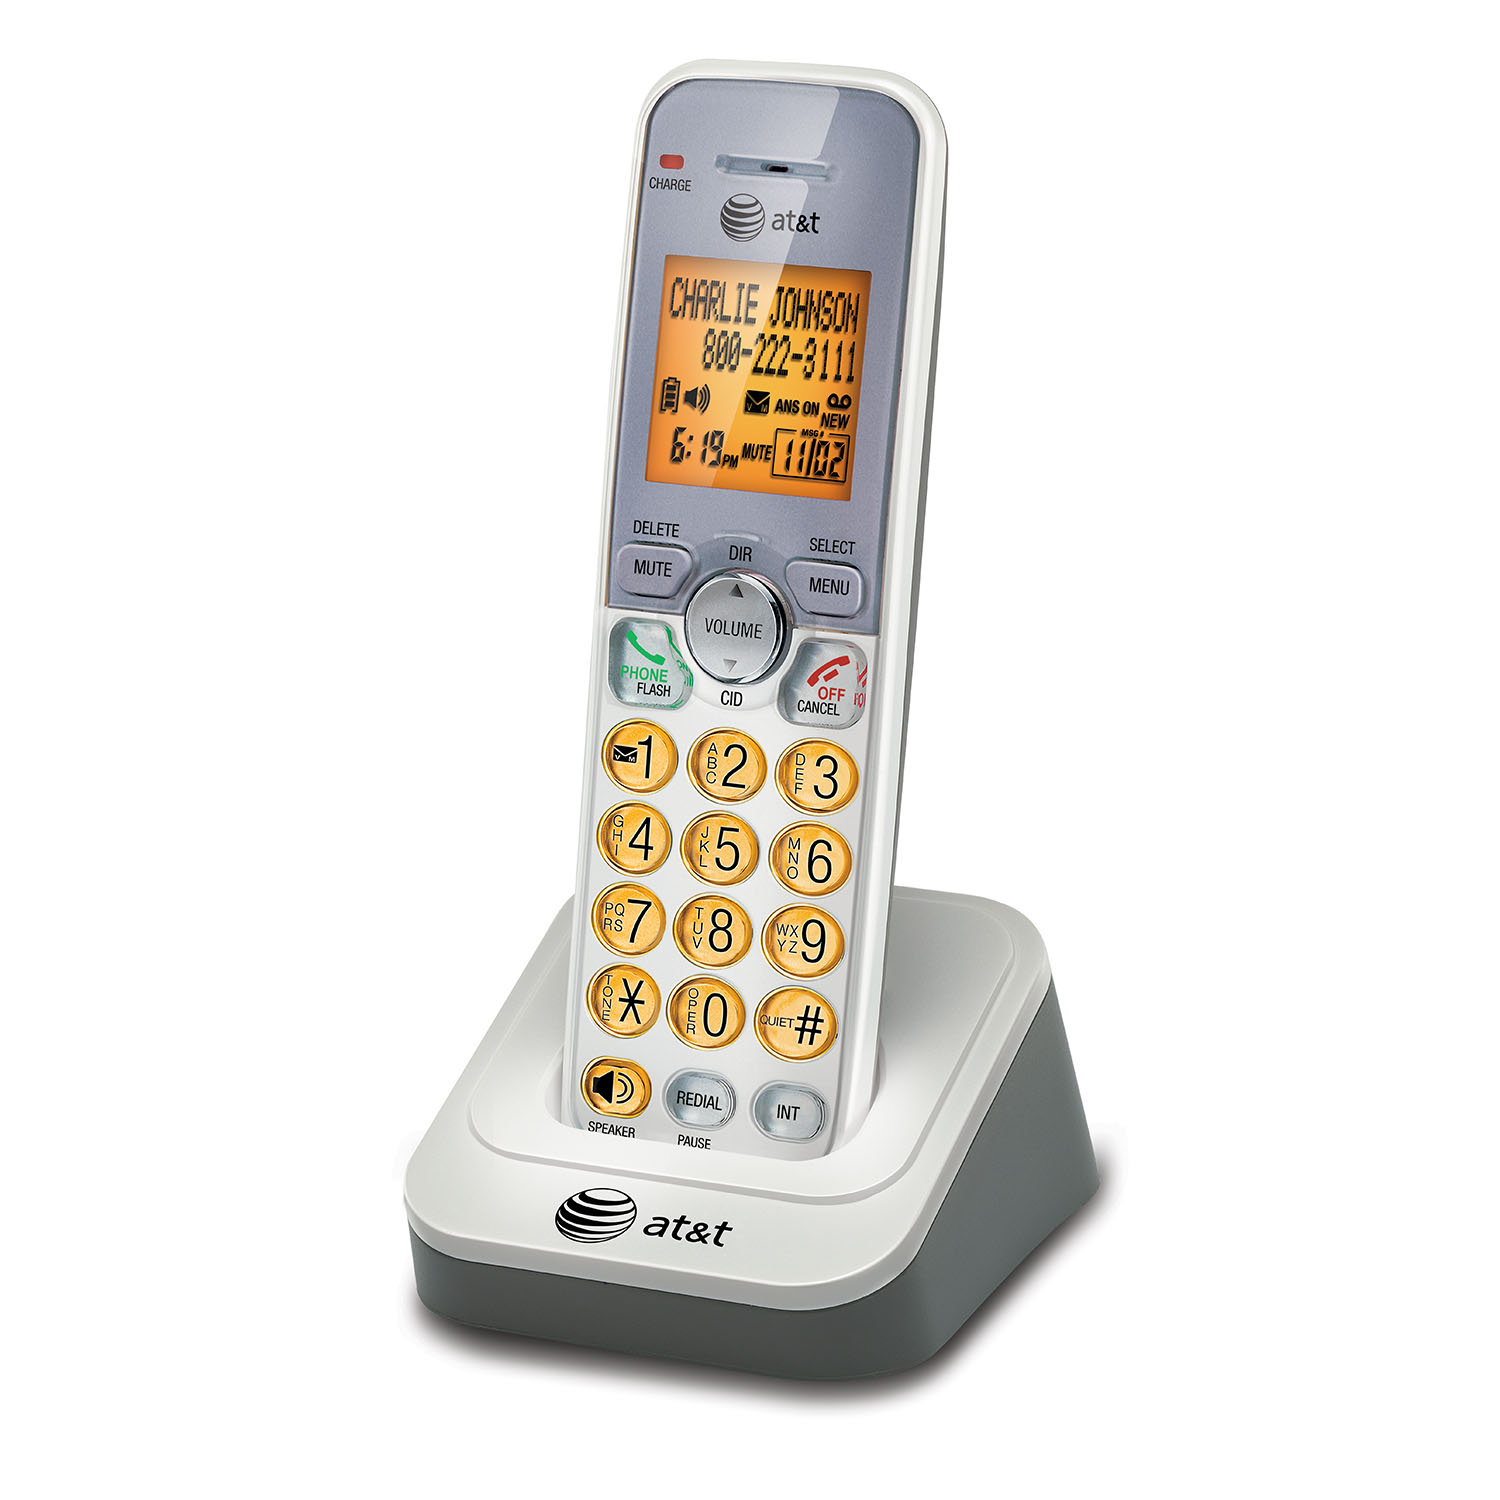 5 handset cordless answering system with caller ID/call waiting - view 6